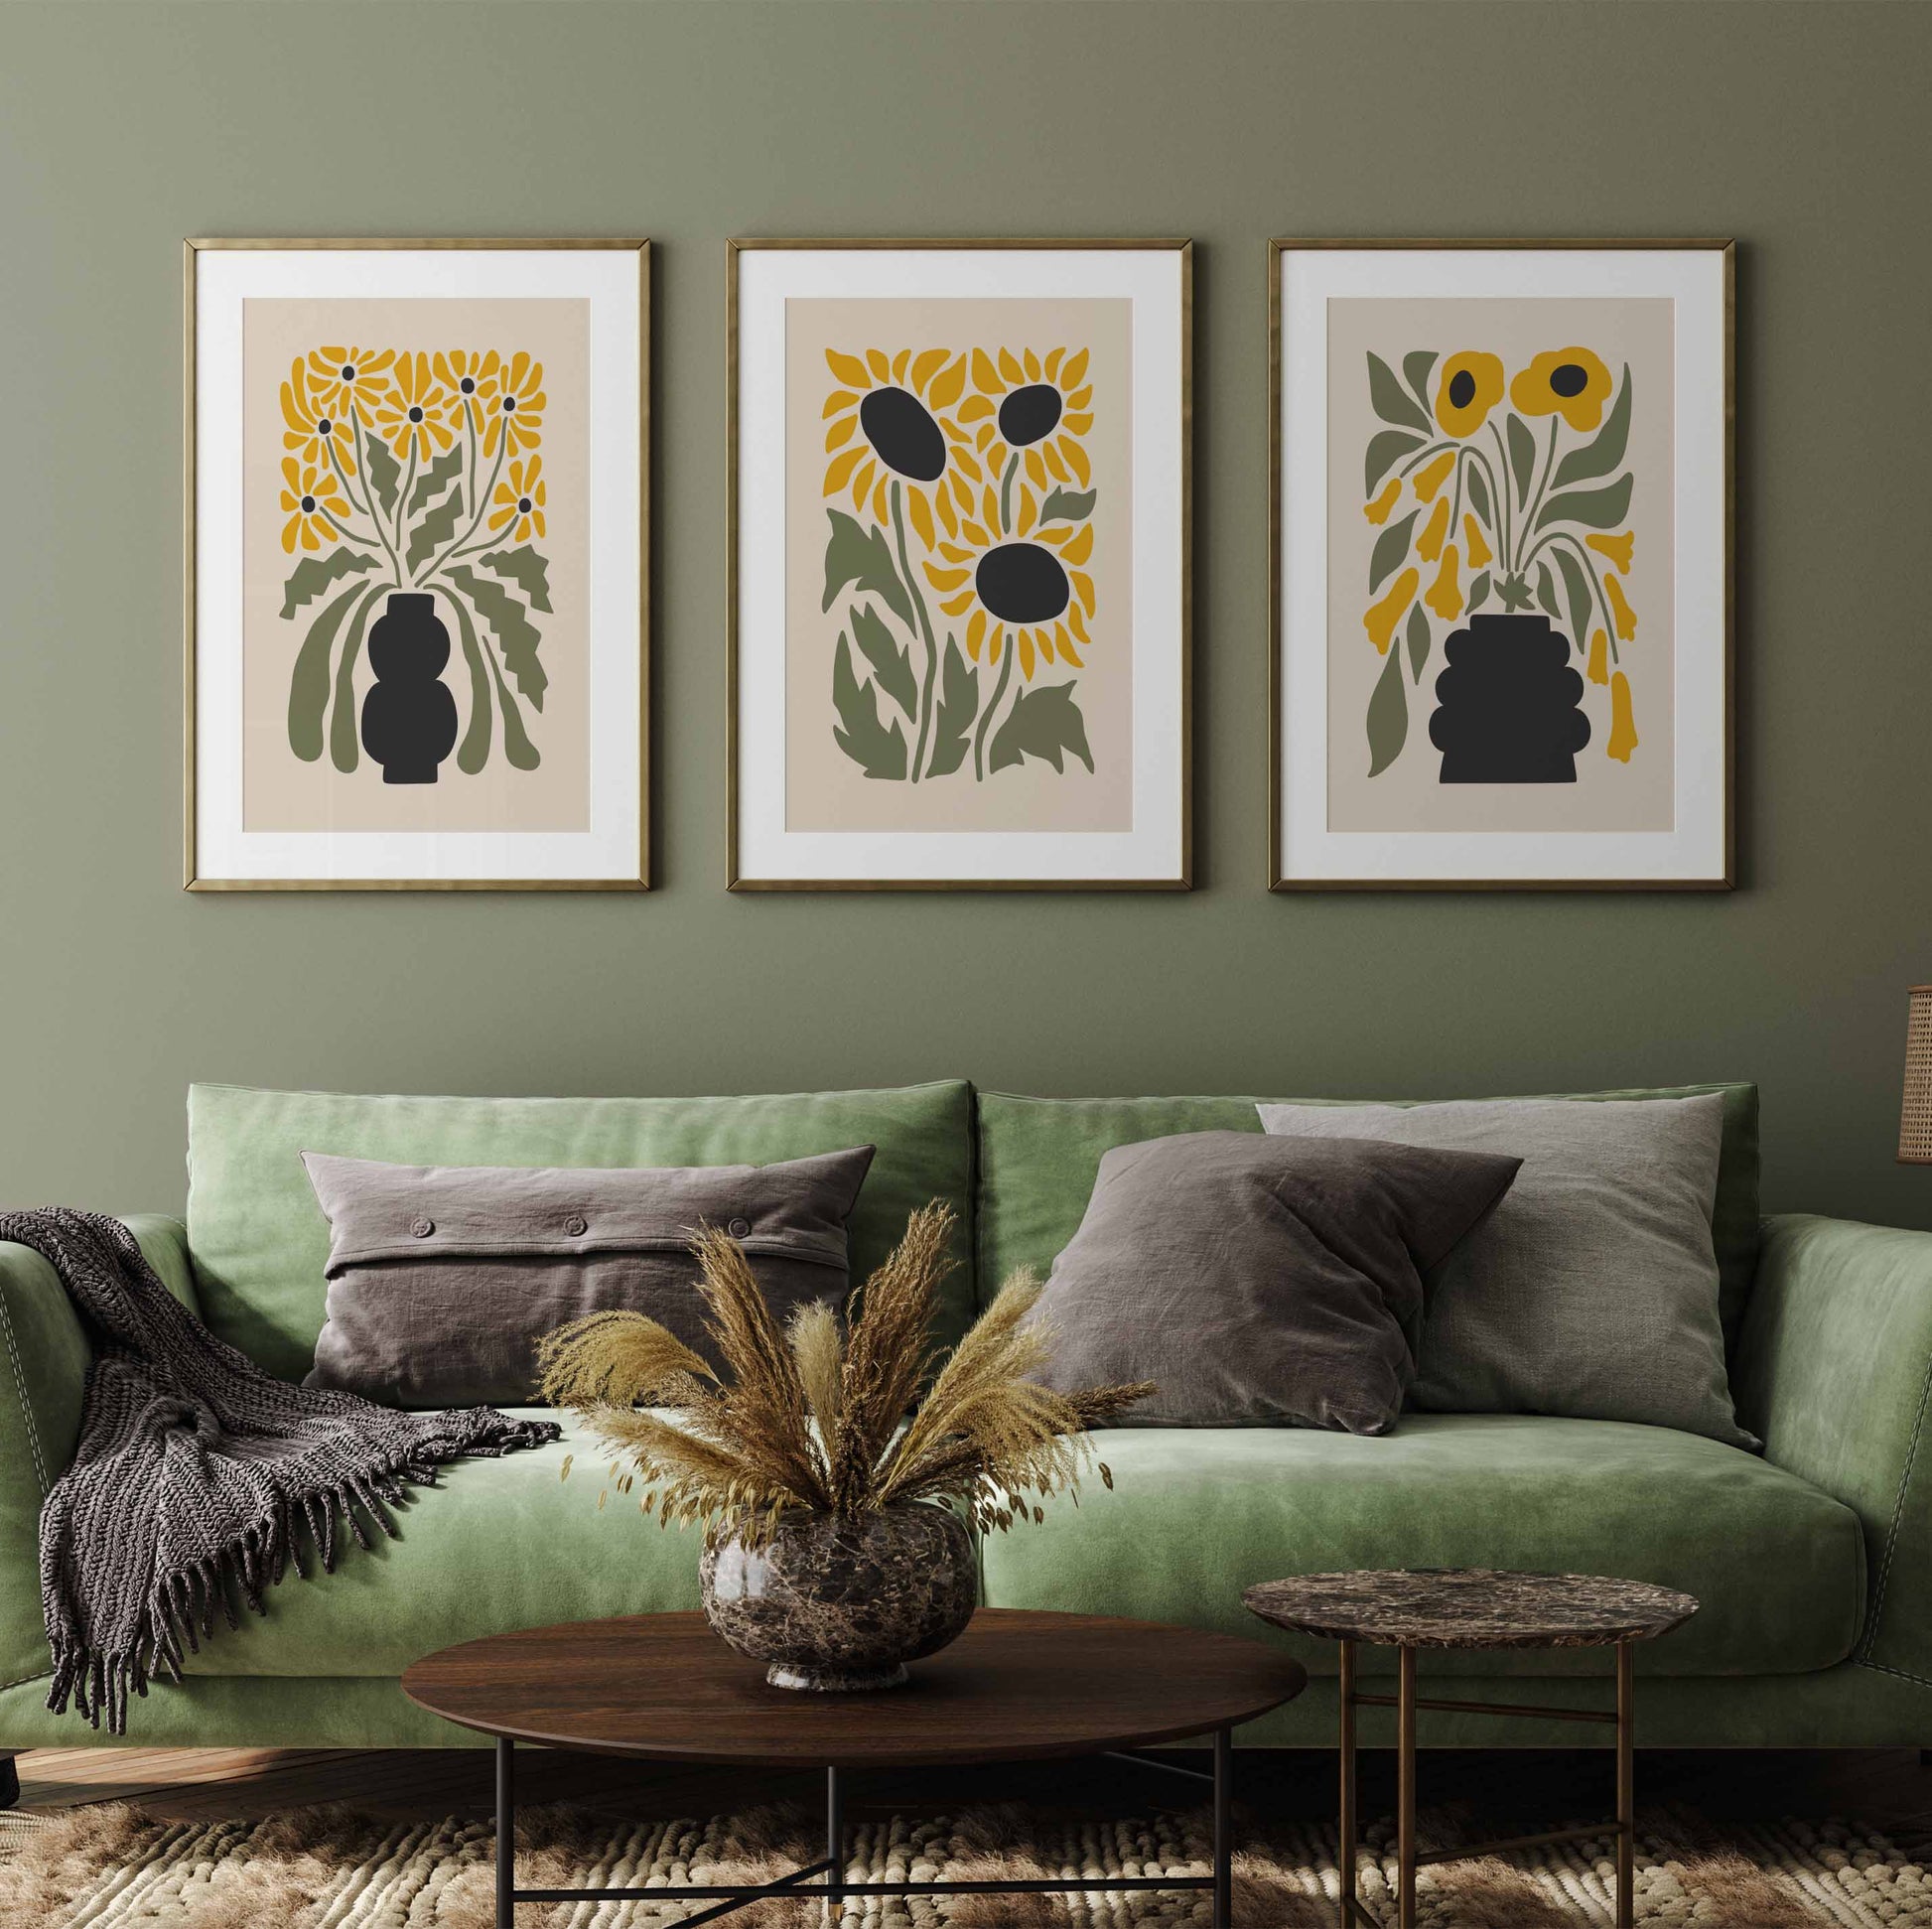 Set of 3 flower wall art prints in yellow and green